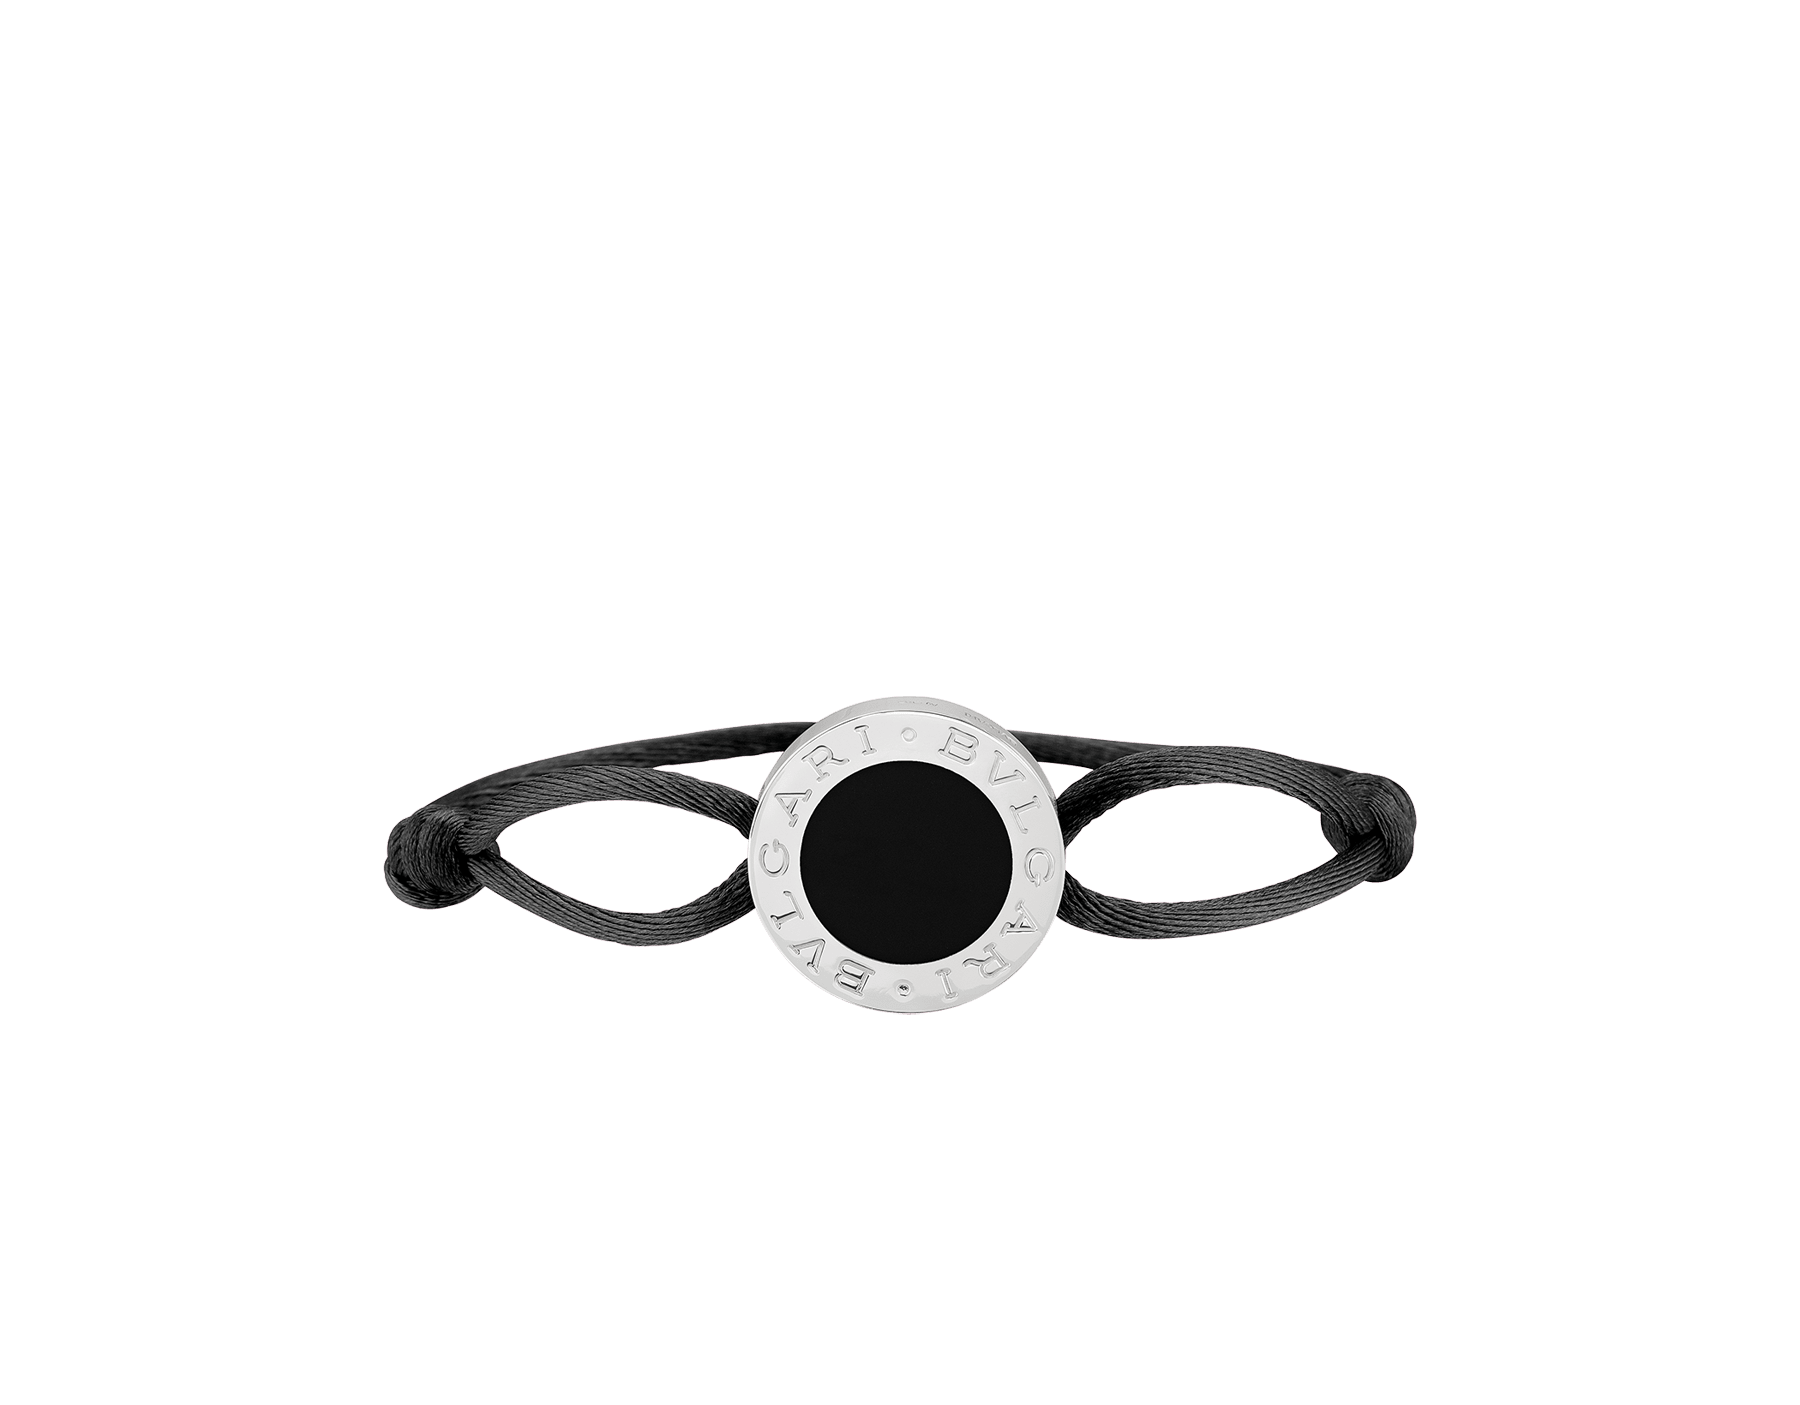 BVLGARI BVLGARI bracelet in topazio fabric with an iconic logo décor in sterling silver and topazio enamel BRACLT-LUCKYUa image 1